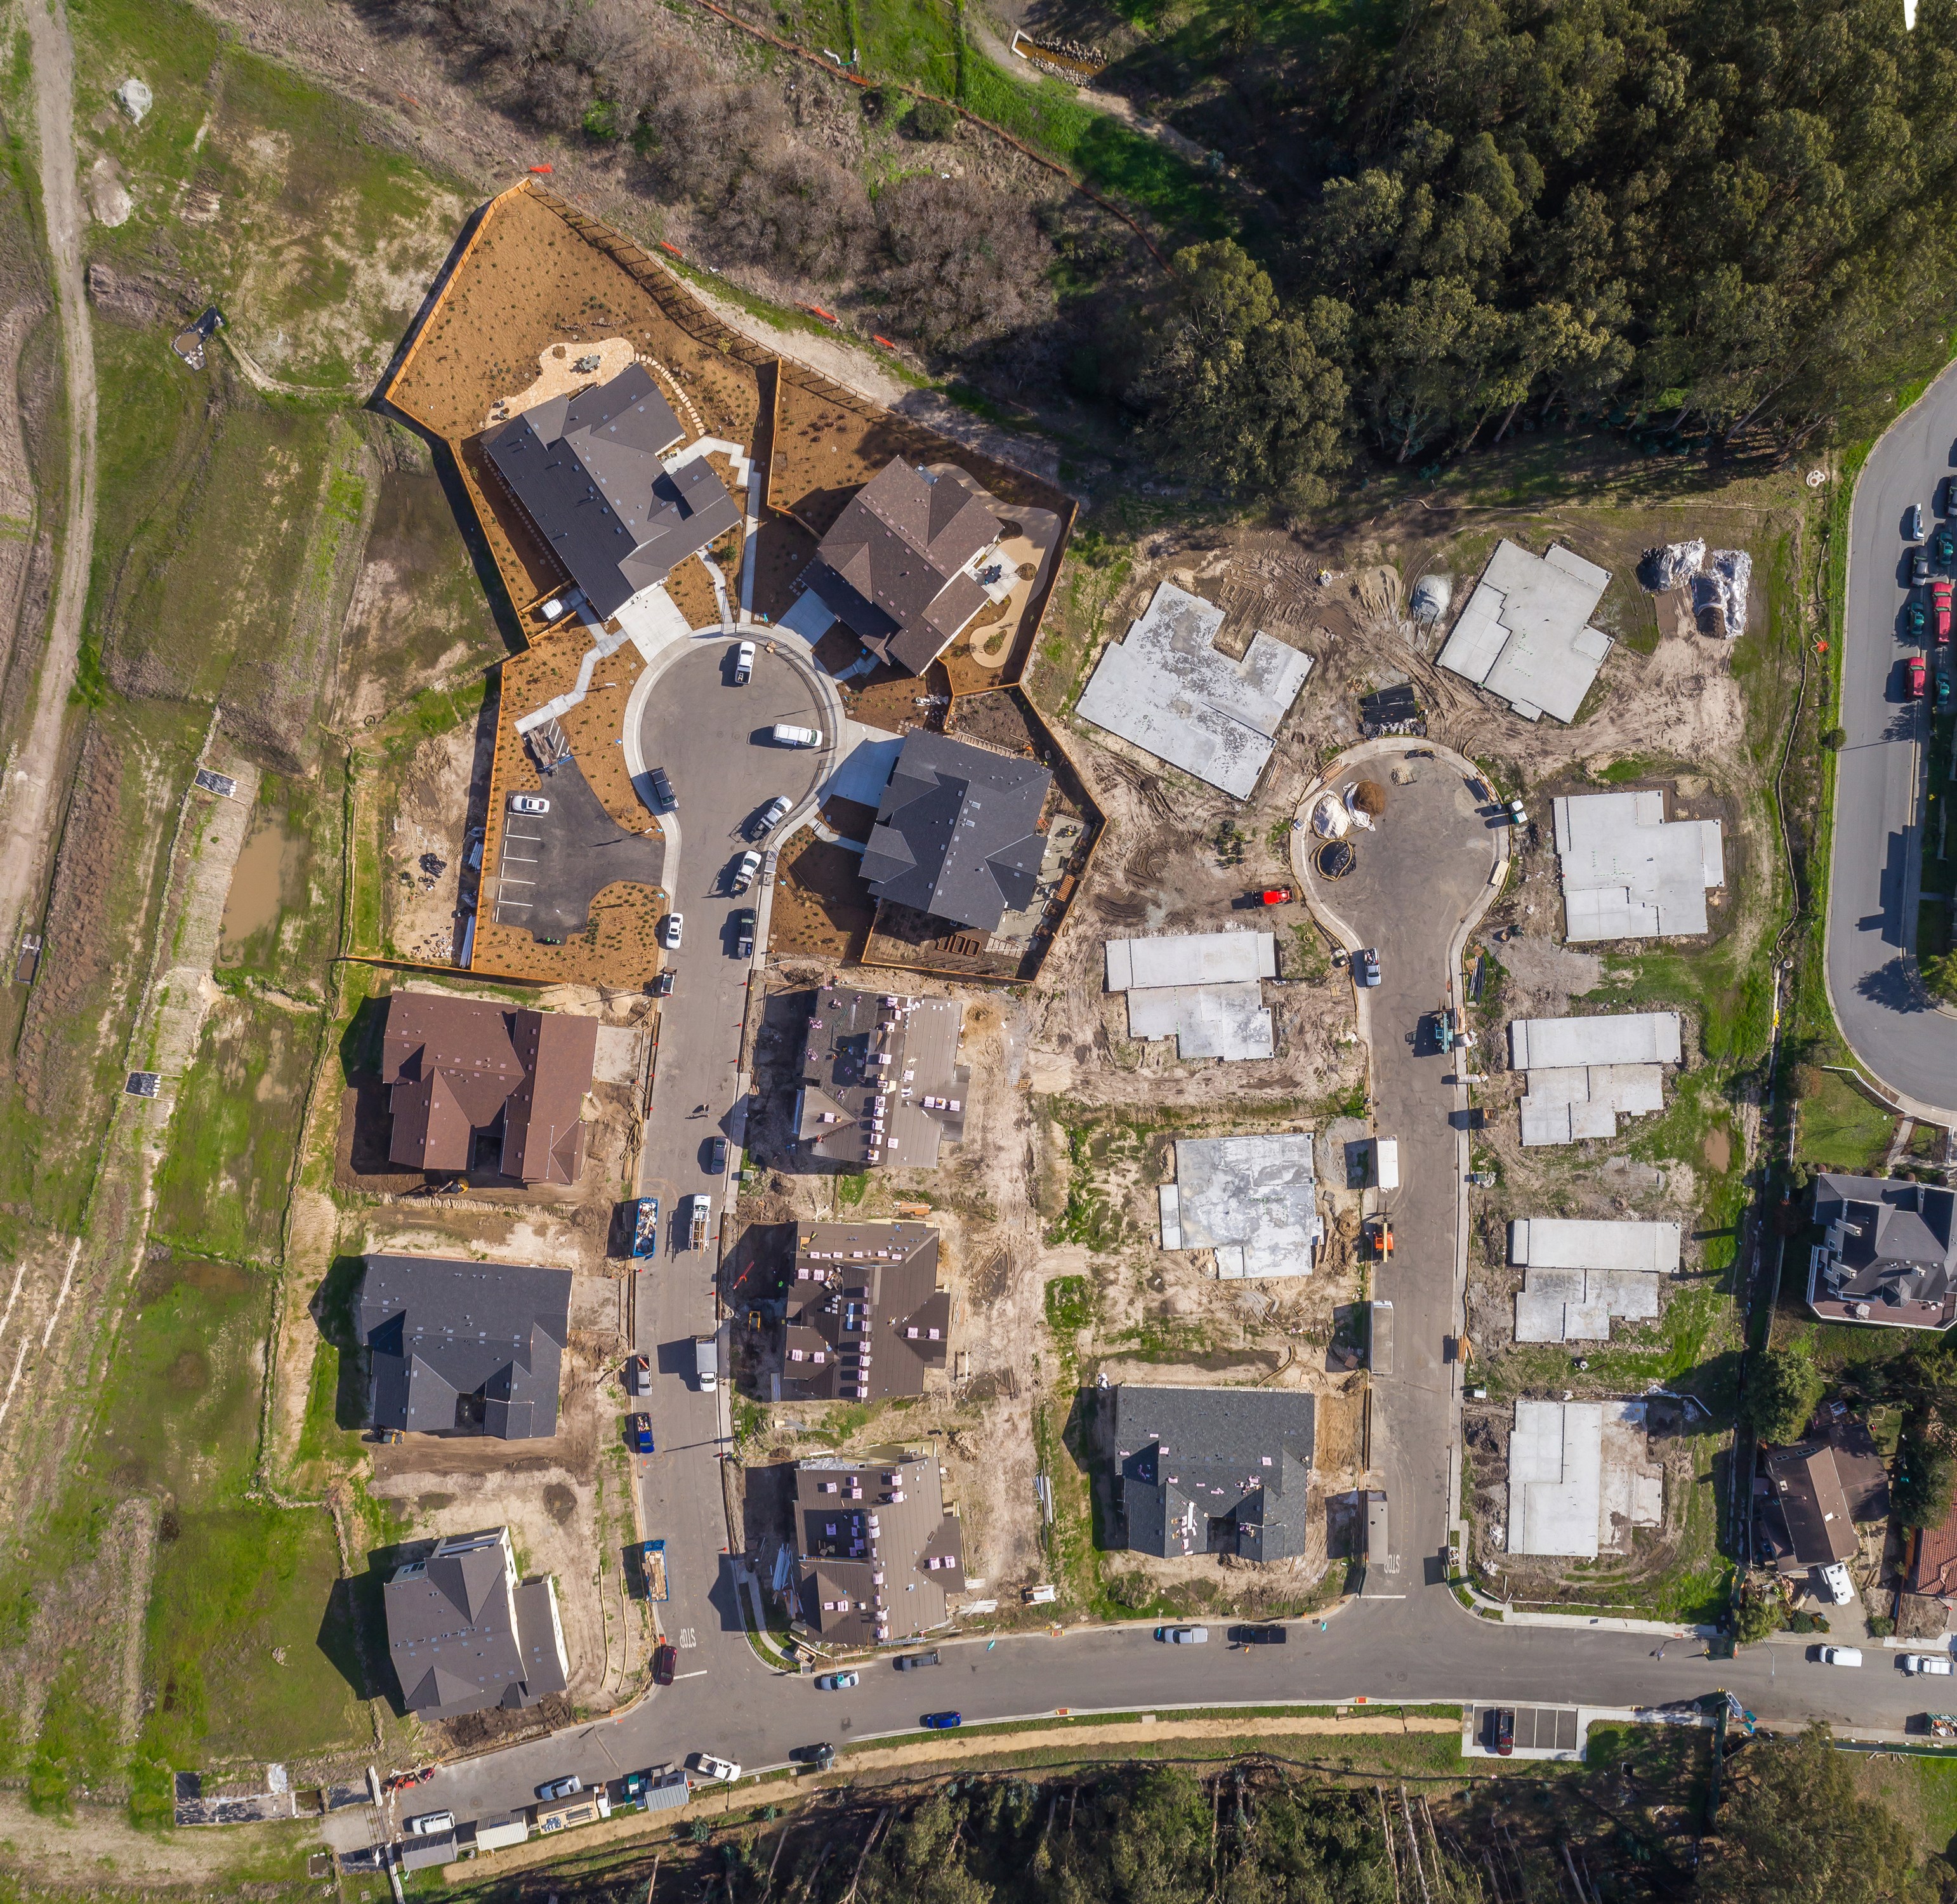 Aerial shot of model homes in a new development under construction